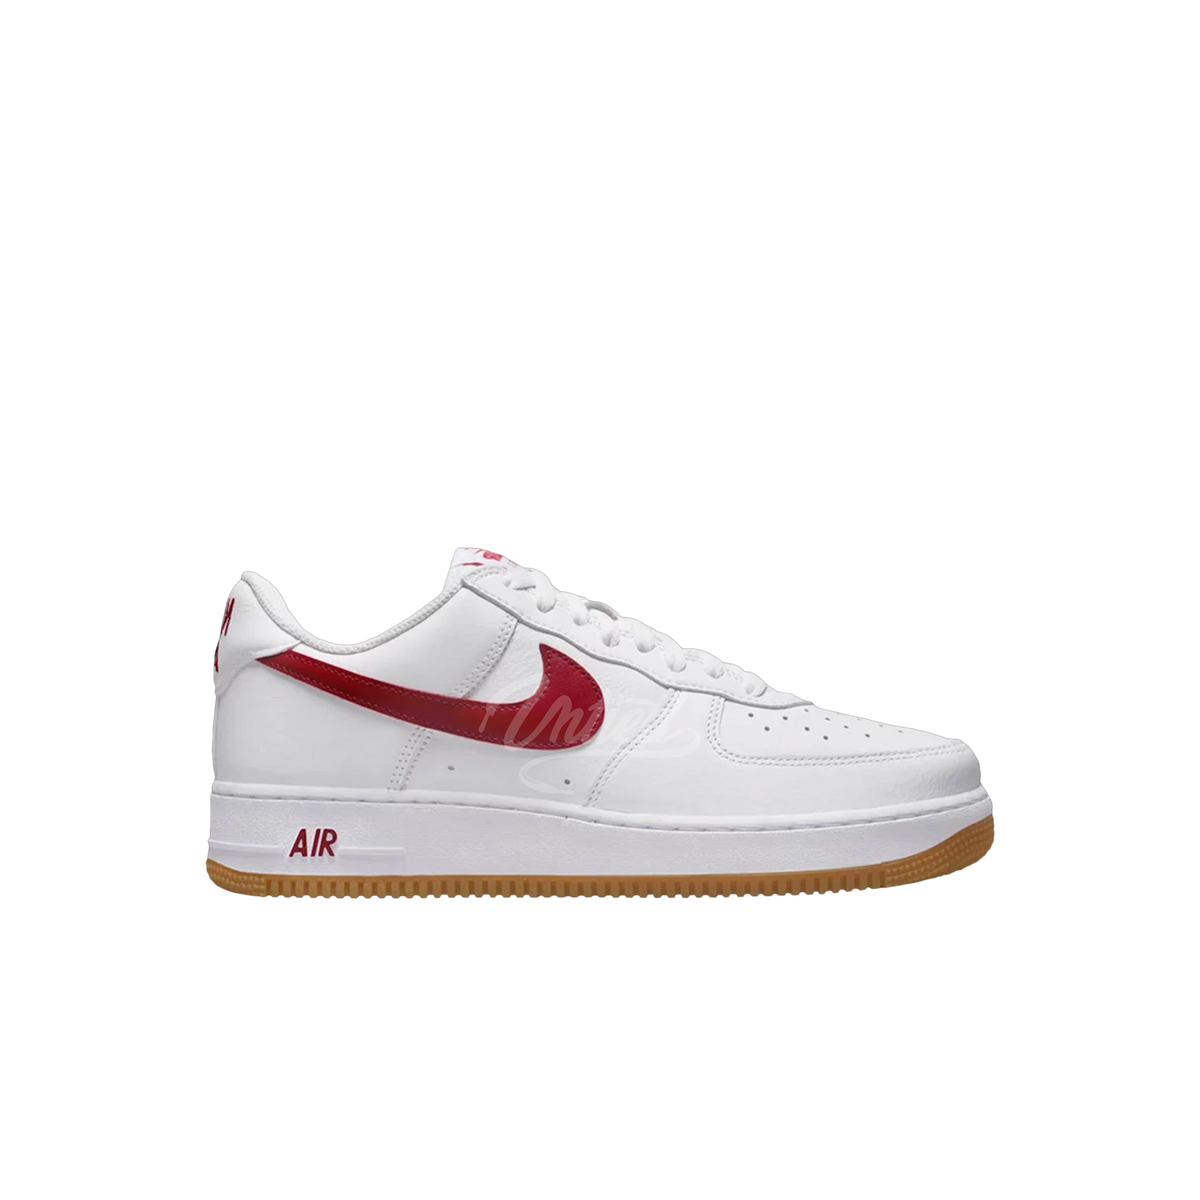 Air Force 1 Color of the Month "University Red/Gum"